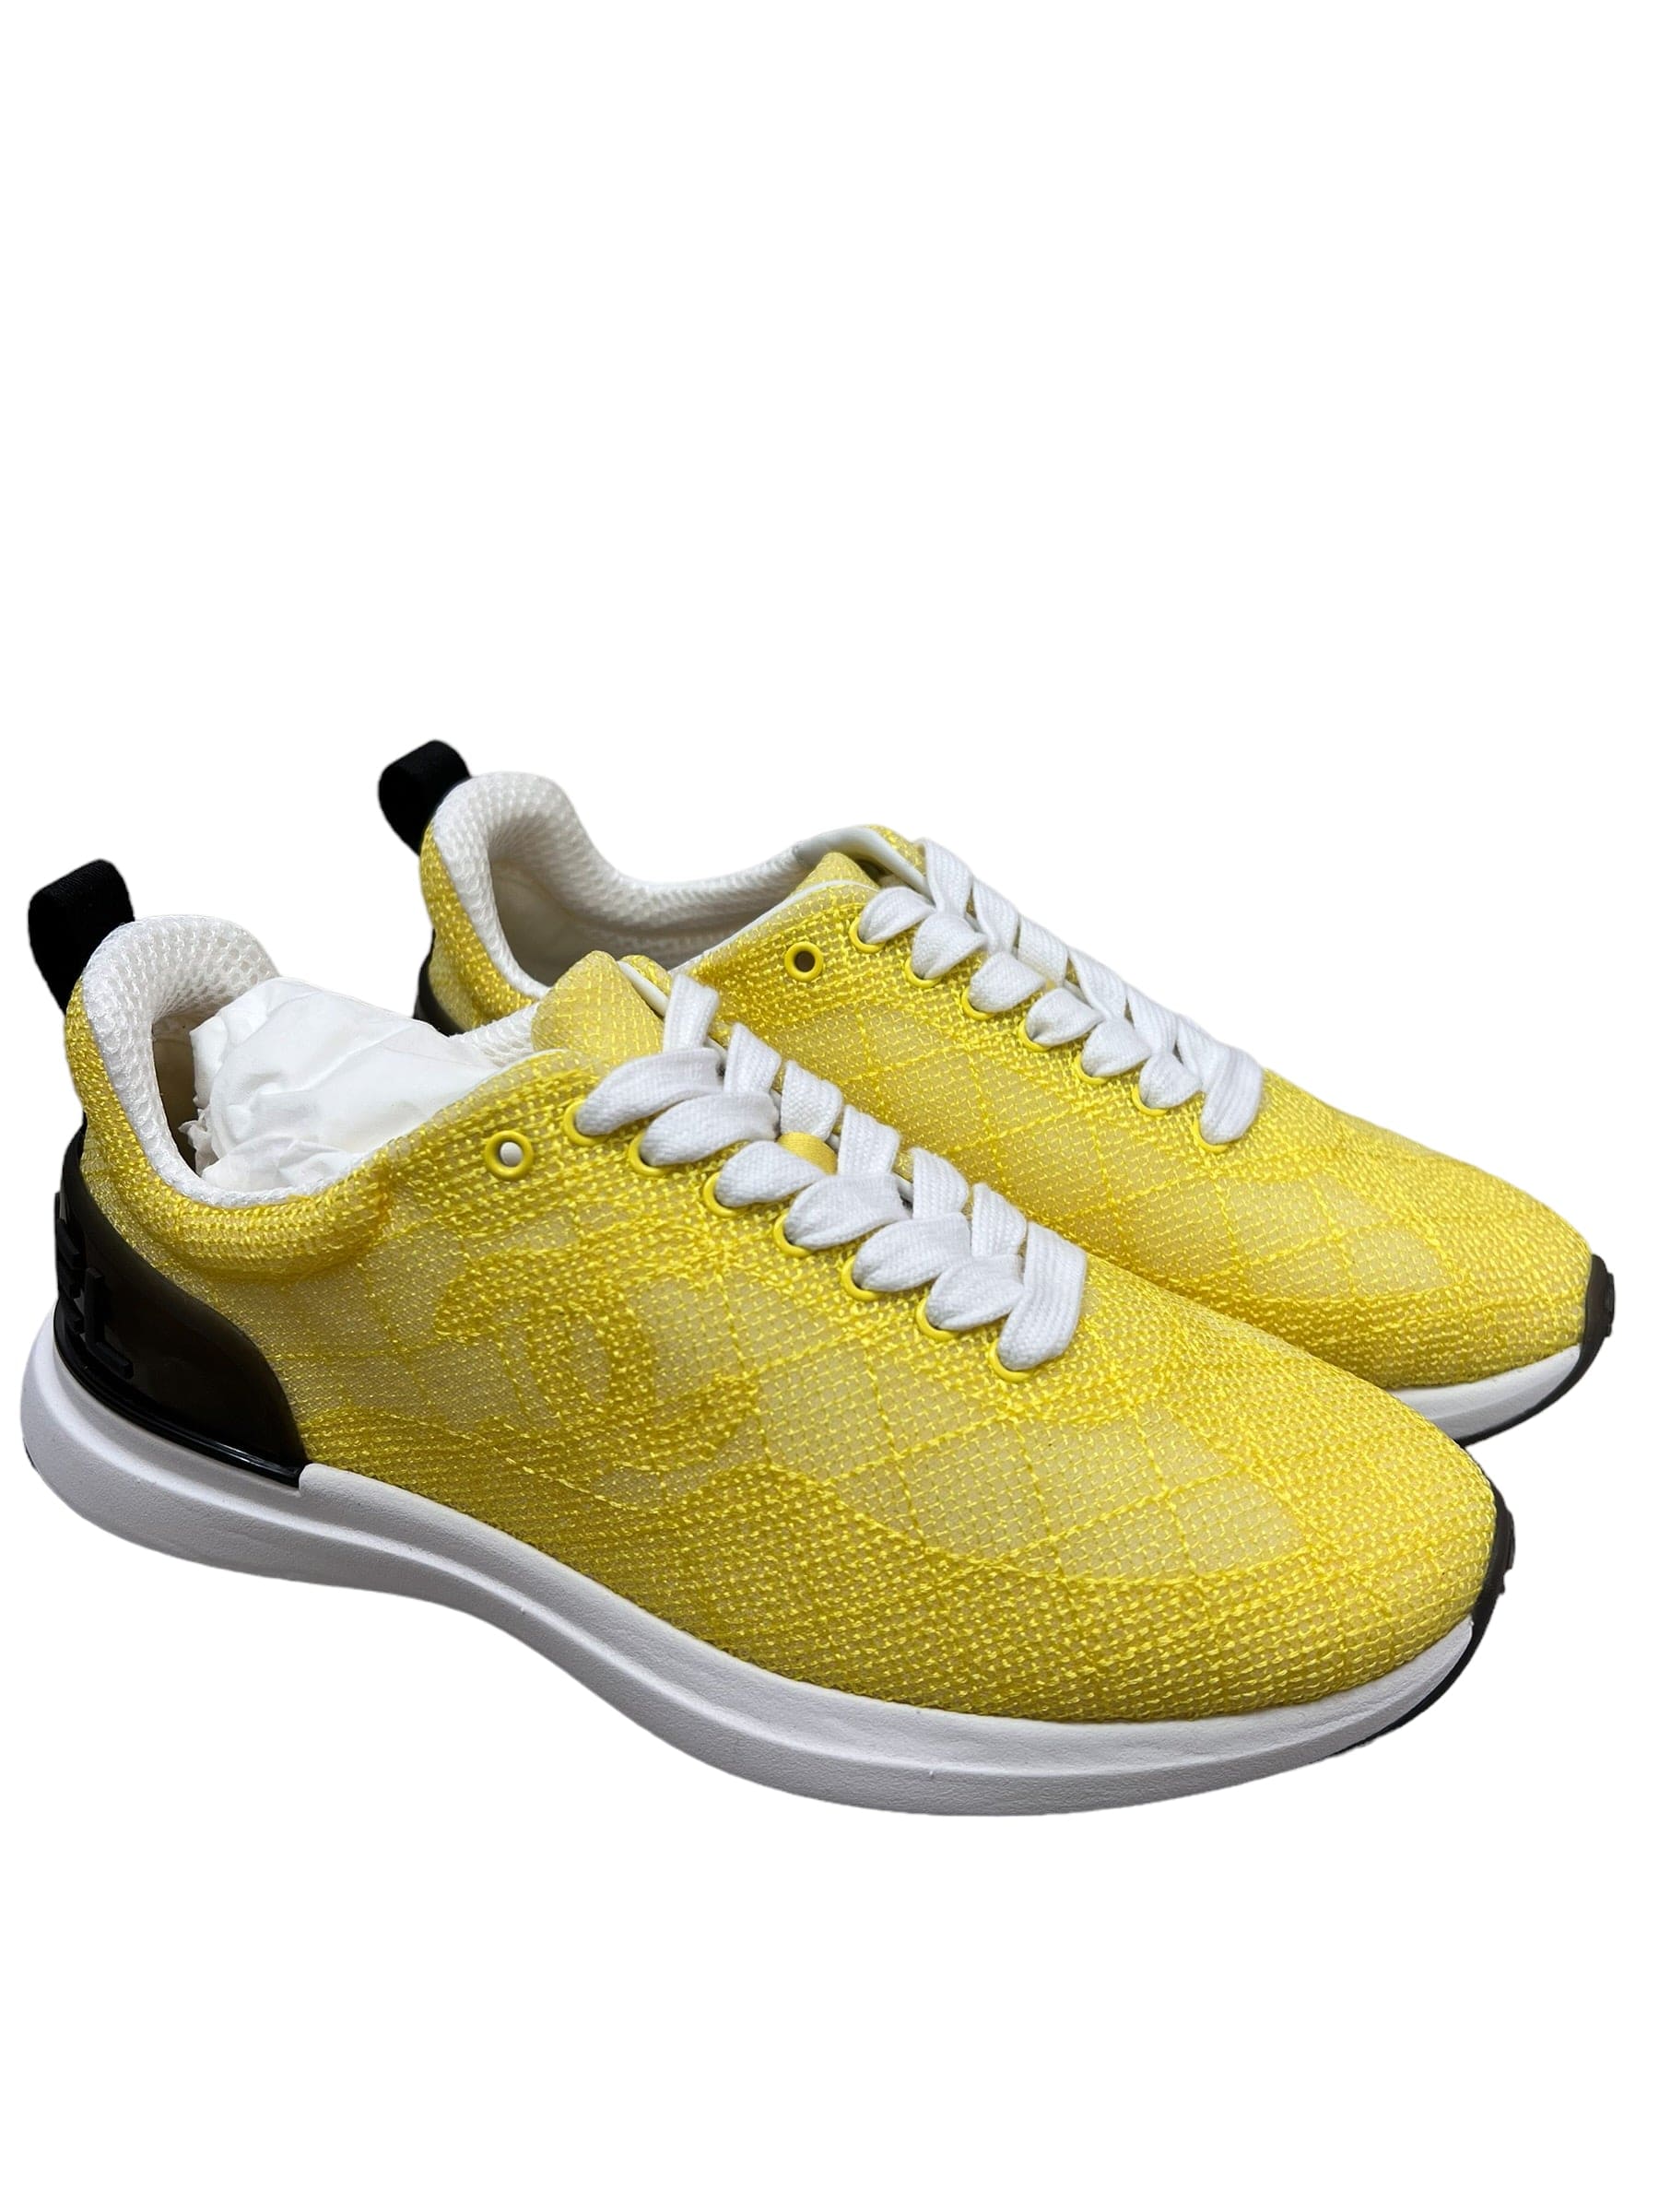 Chanel Chanel Trainers - Yellow Mesh Size 37.5 SKC1671